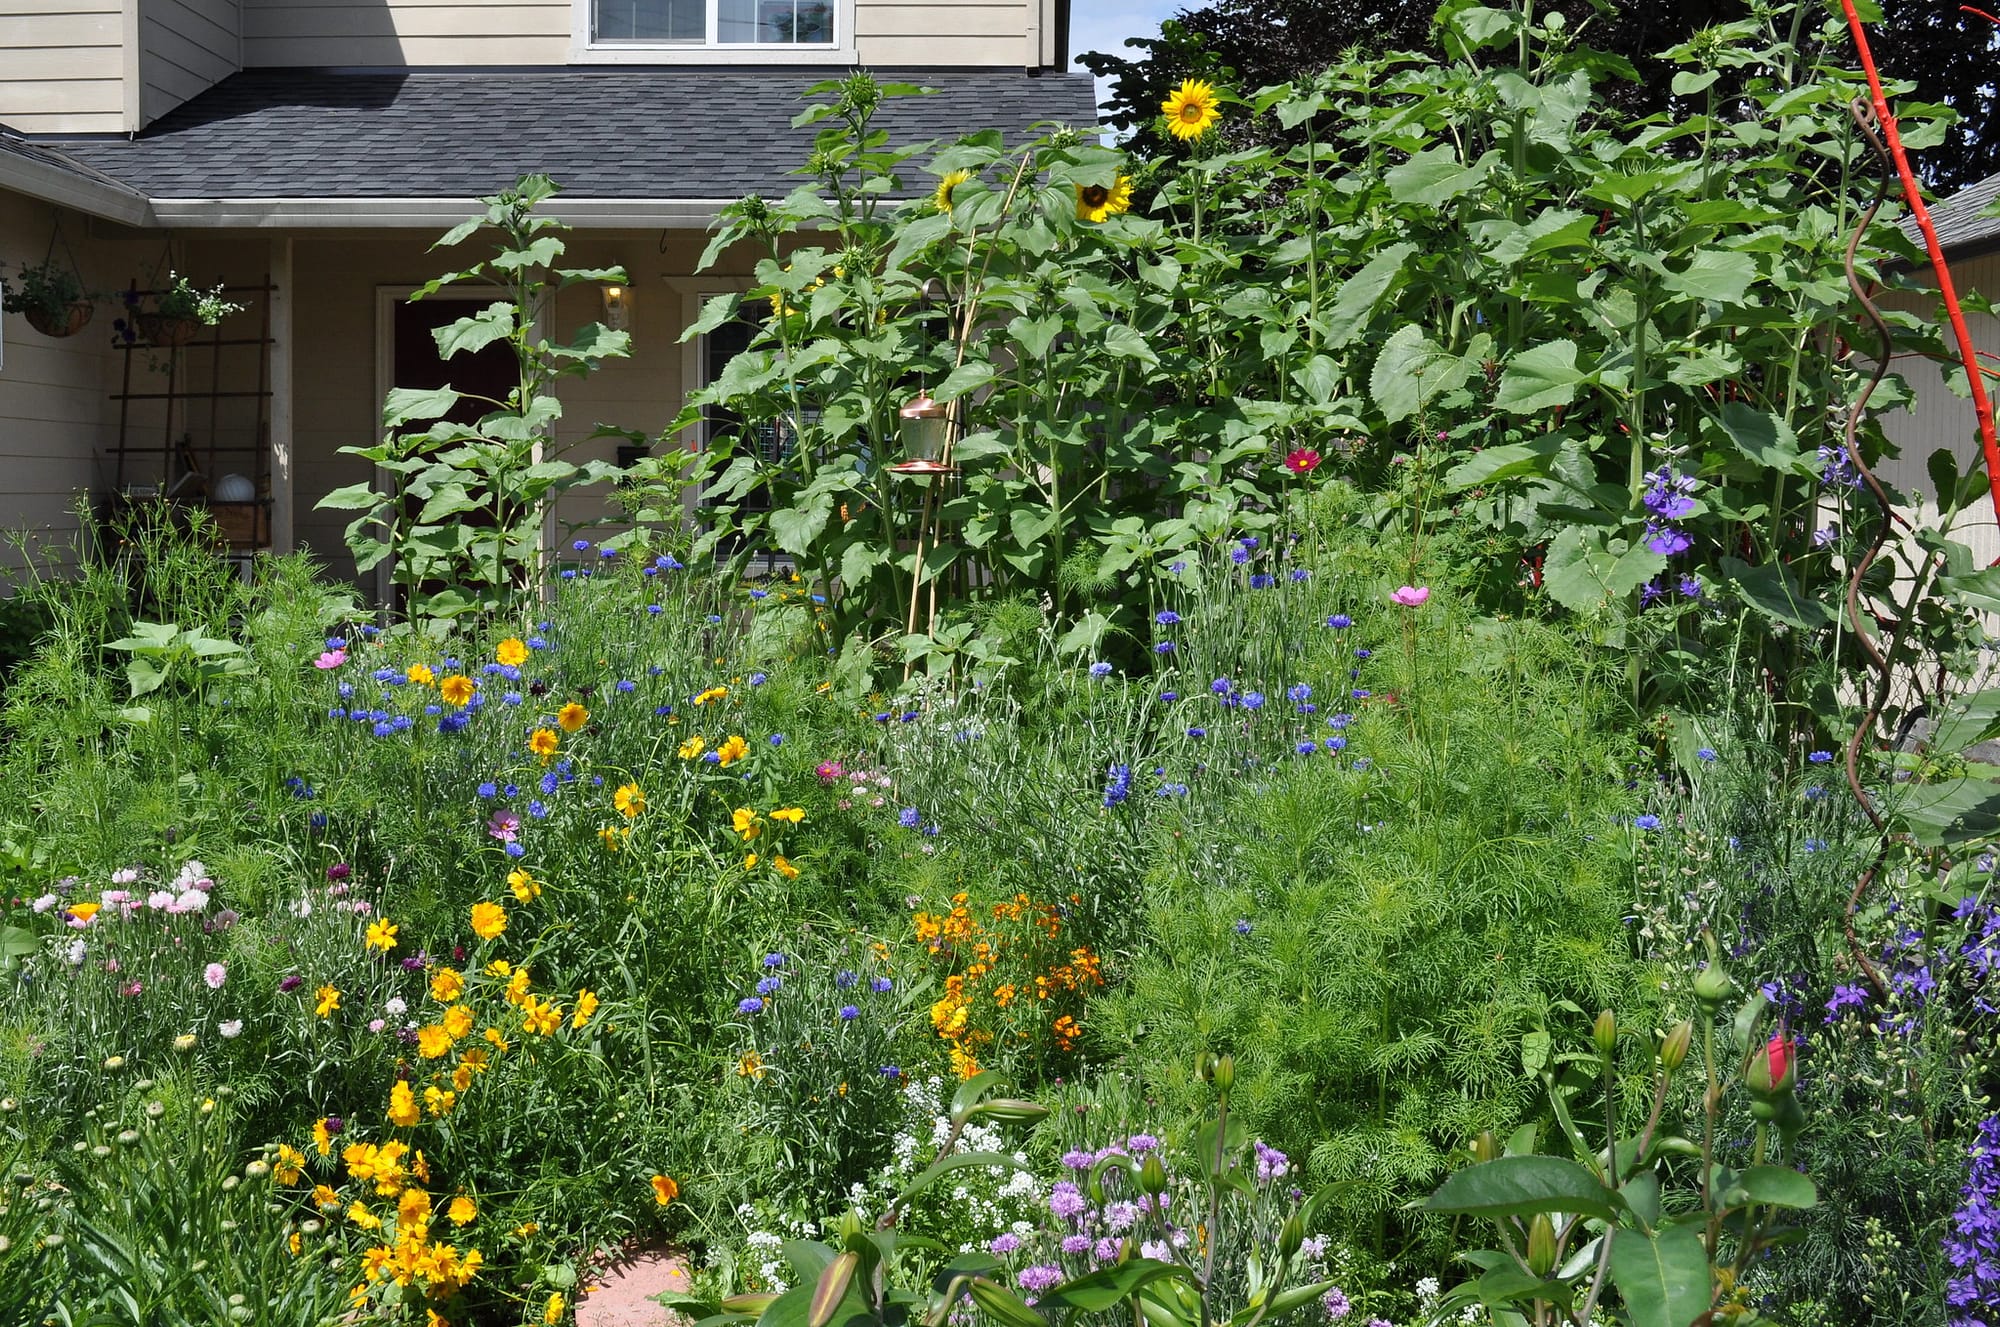 A pollinator garden with many different shapes, sizes, textures, and colors of flowers and plants